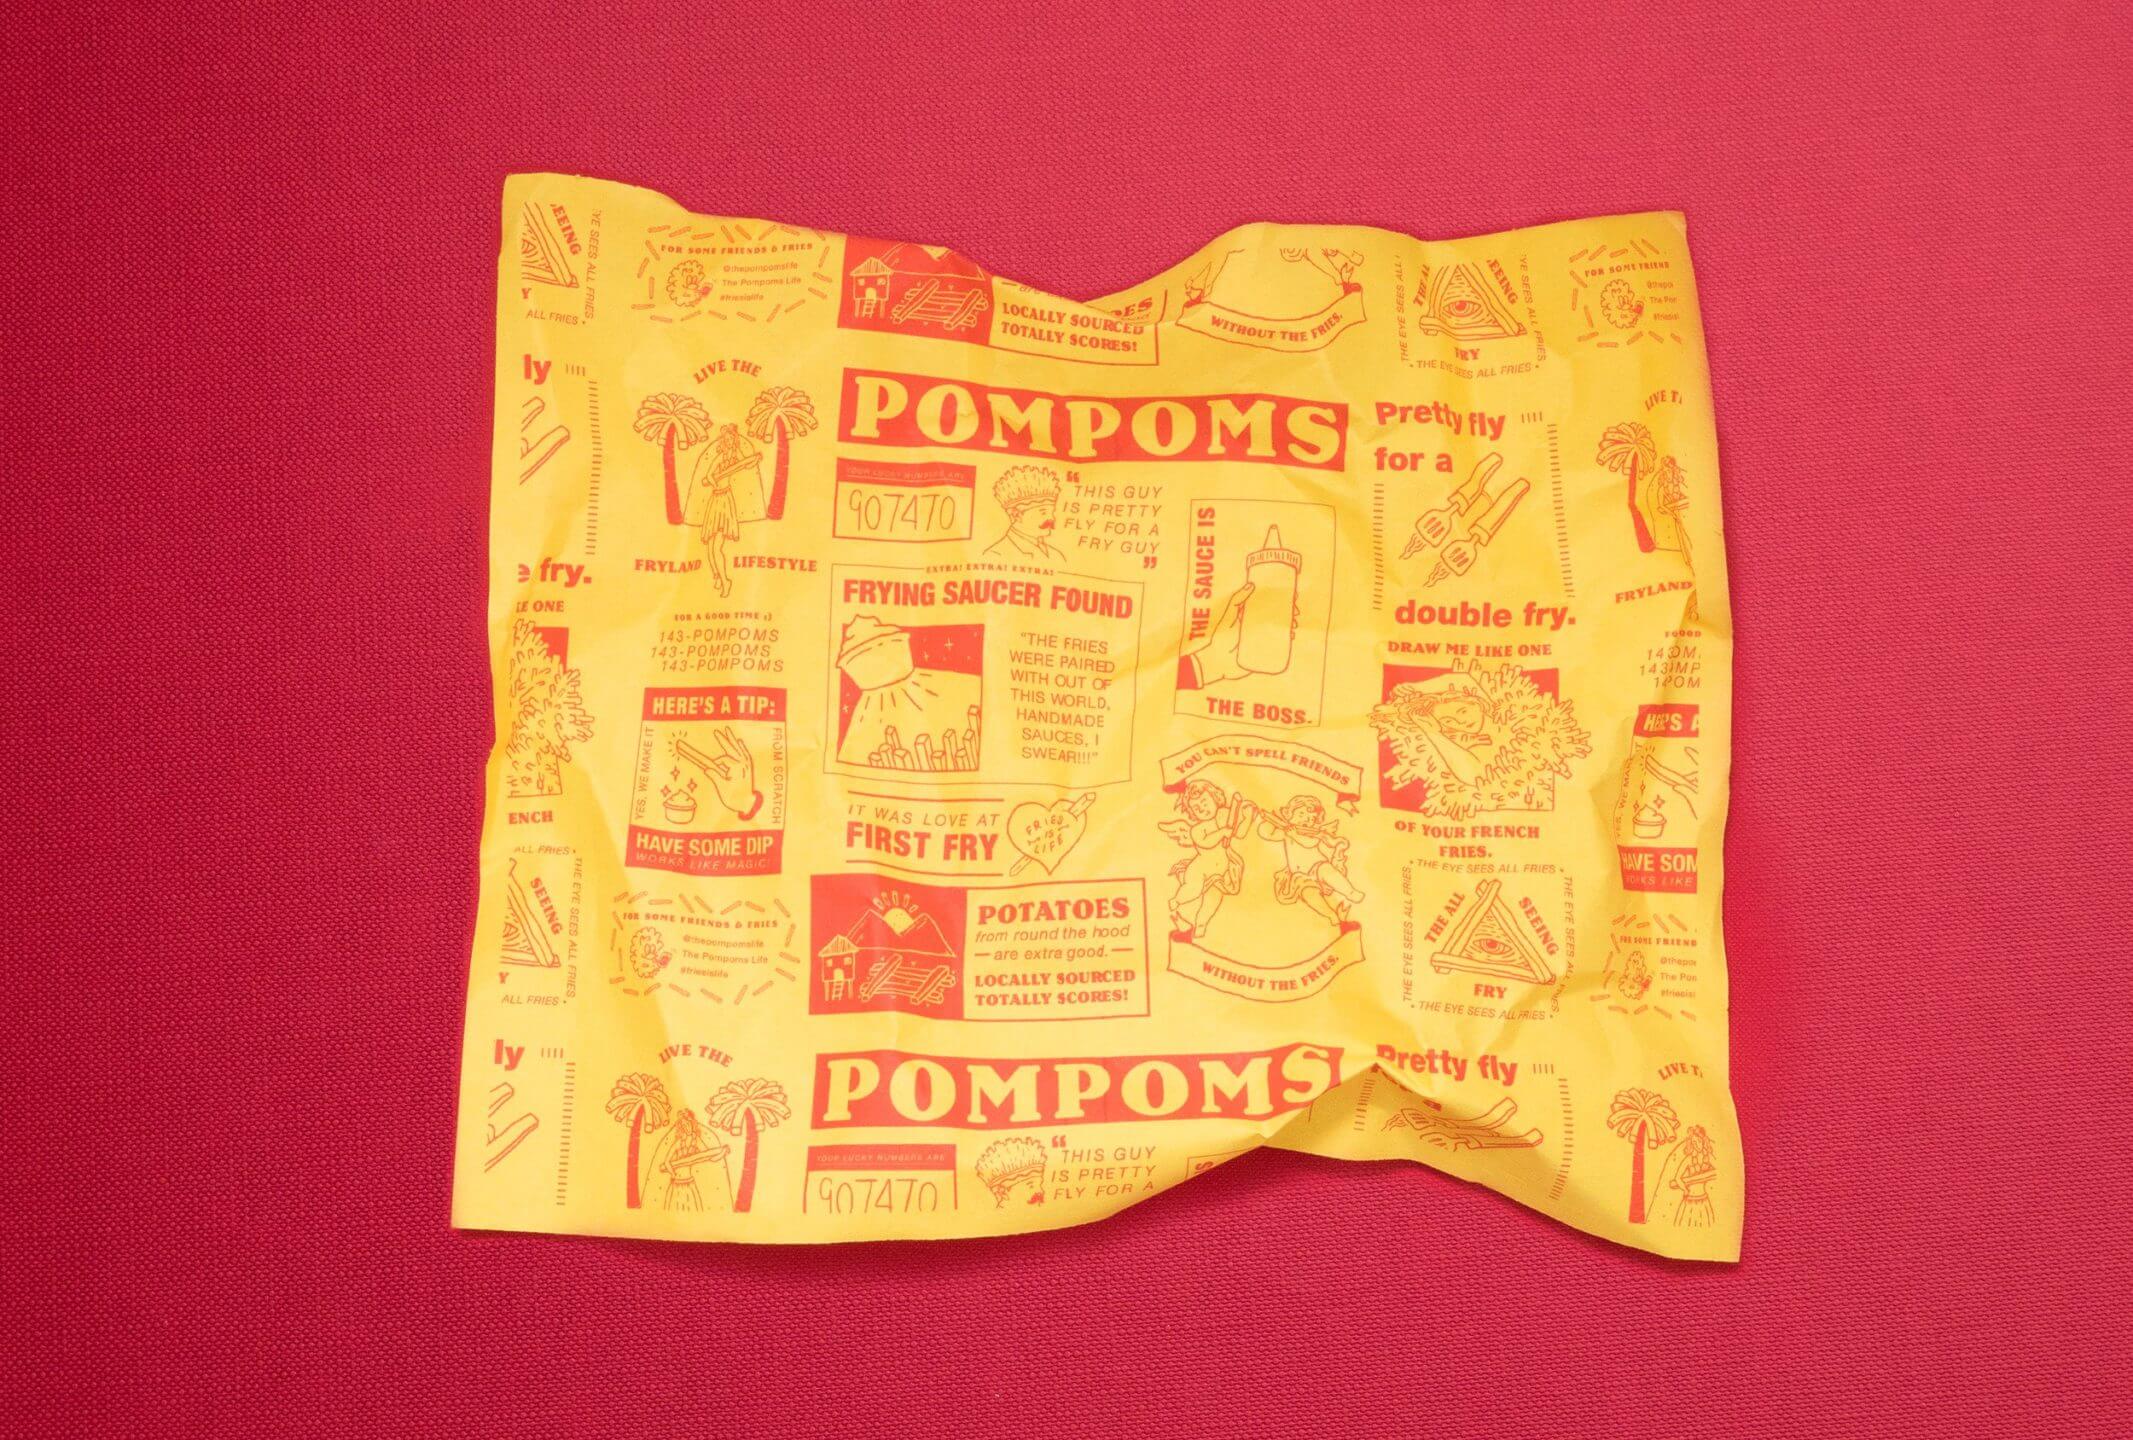 Illustrations and wrapper packaging for food and beverage brand Pompoms